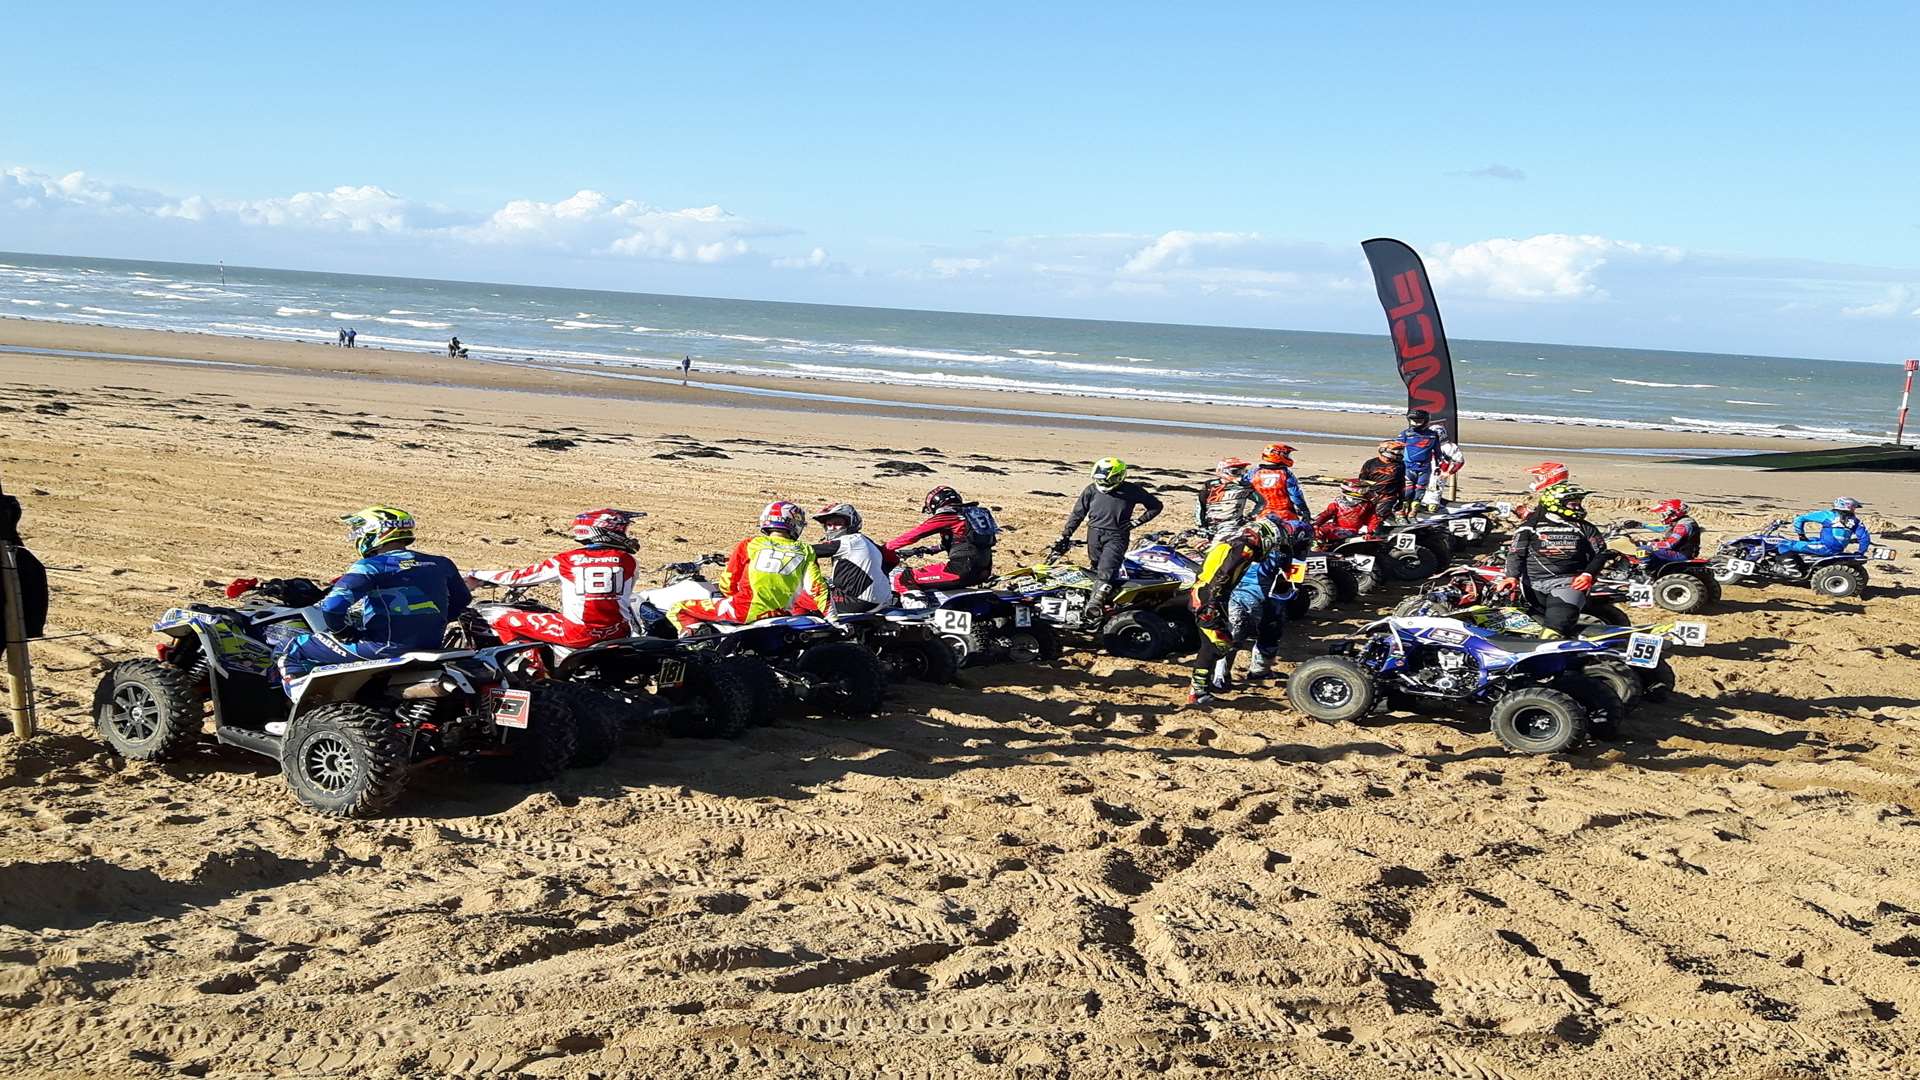 The motorcross event on the Main Sands went ahead